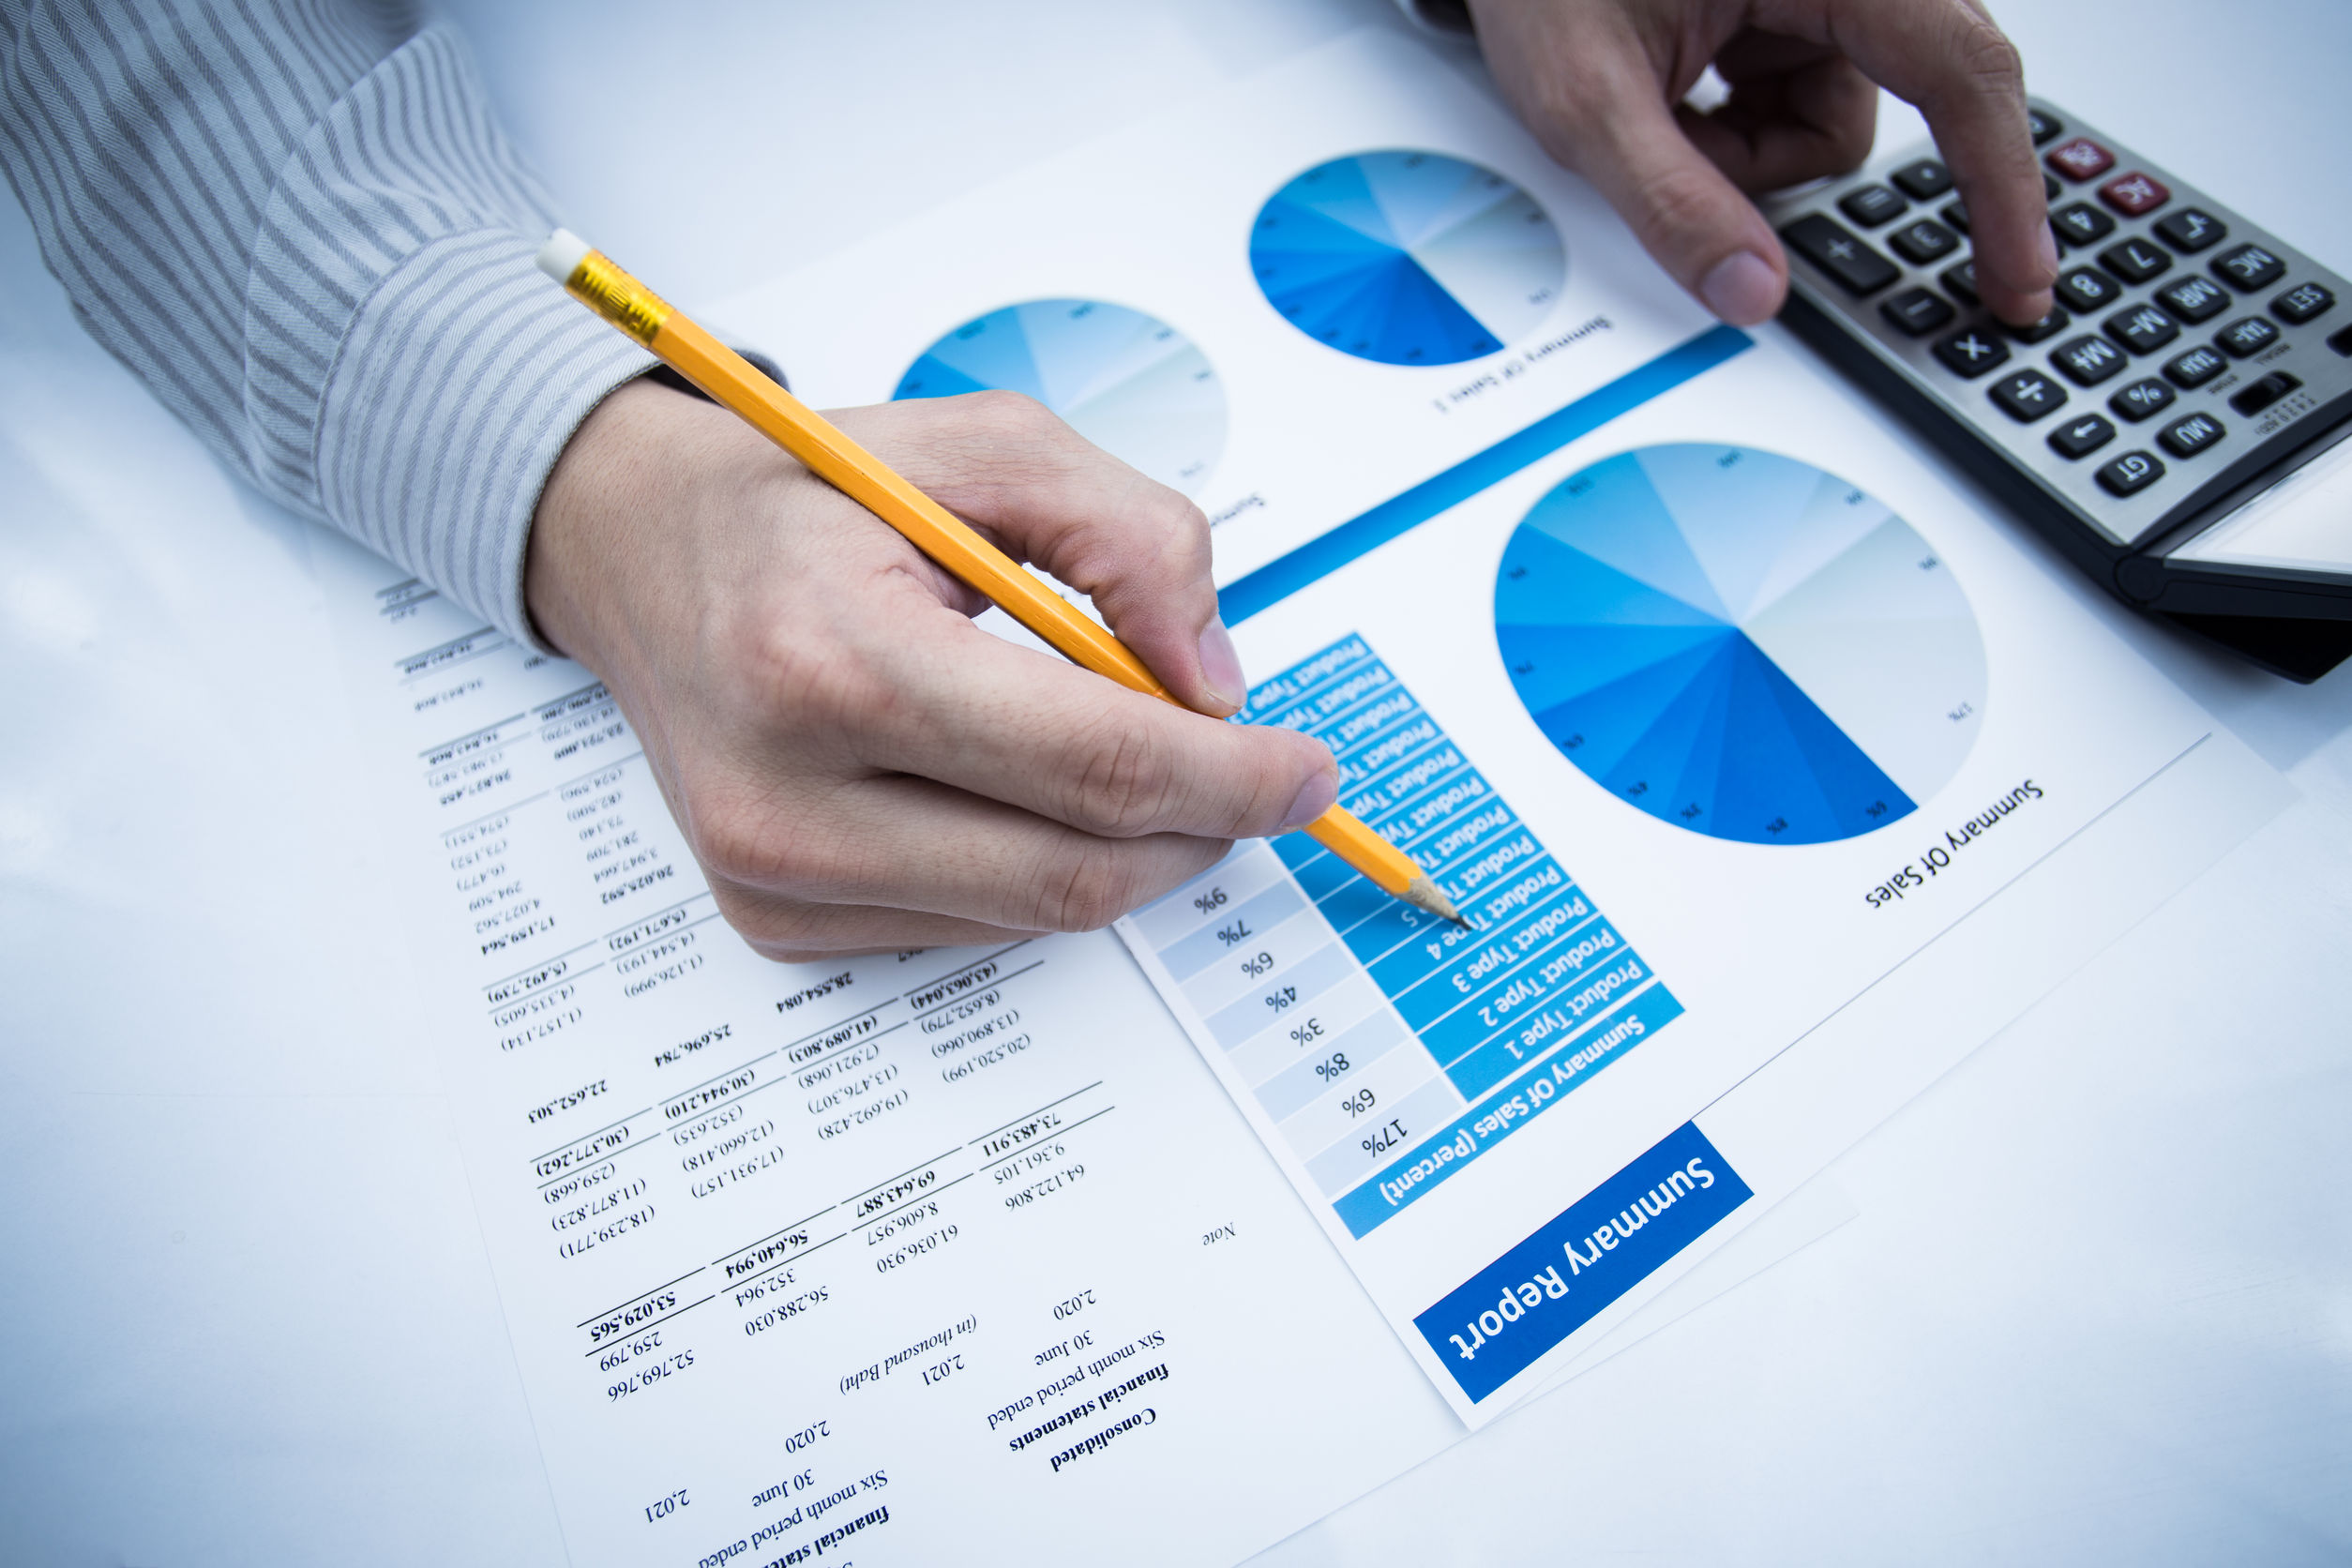 Global Accounting Software Market Operation Data, Research Methodology, Analysis & Forecast-2024